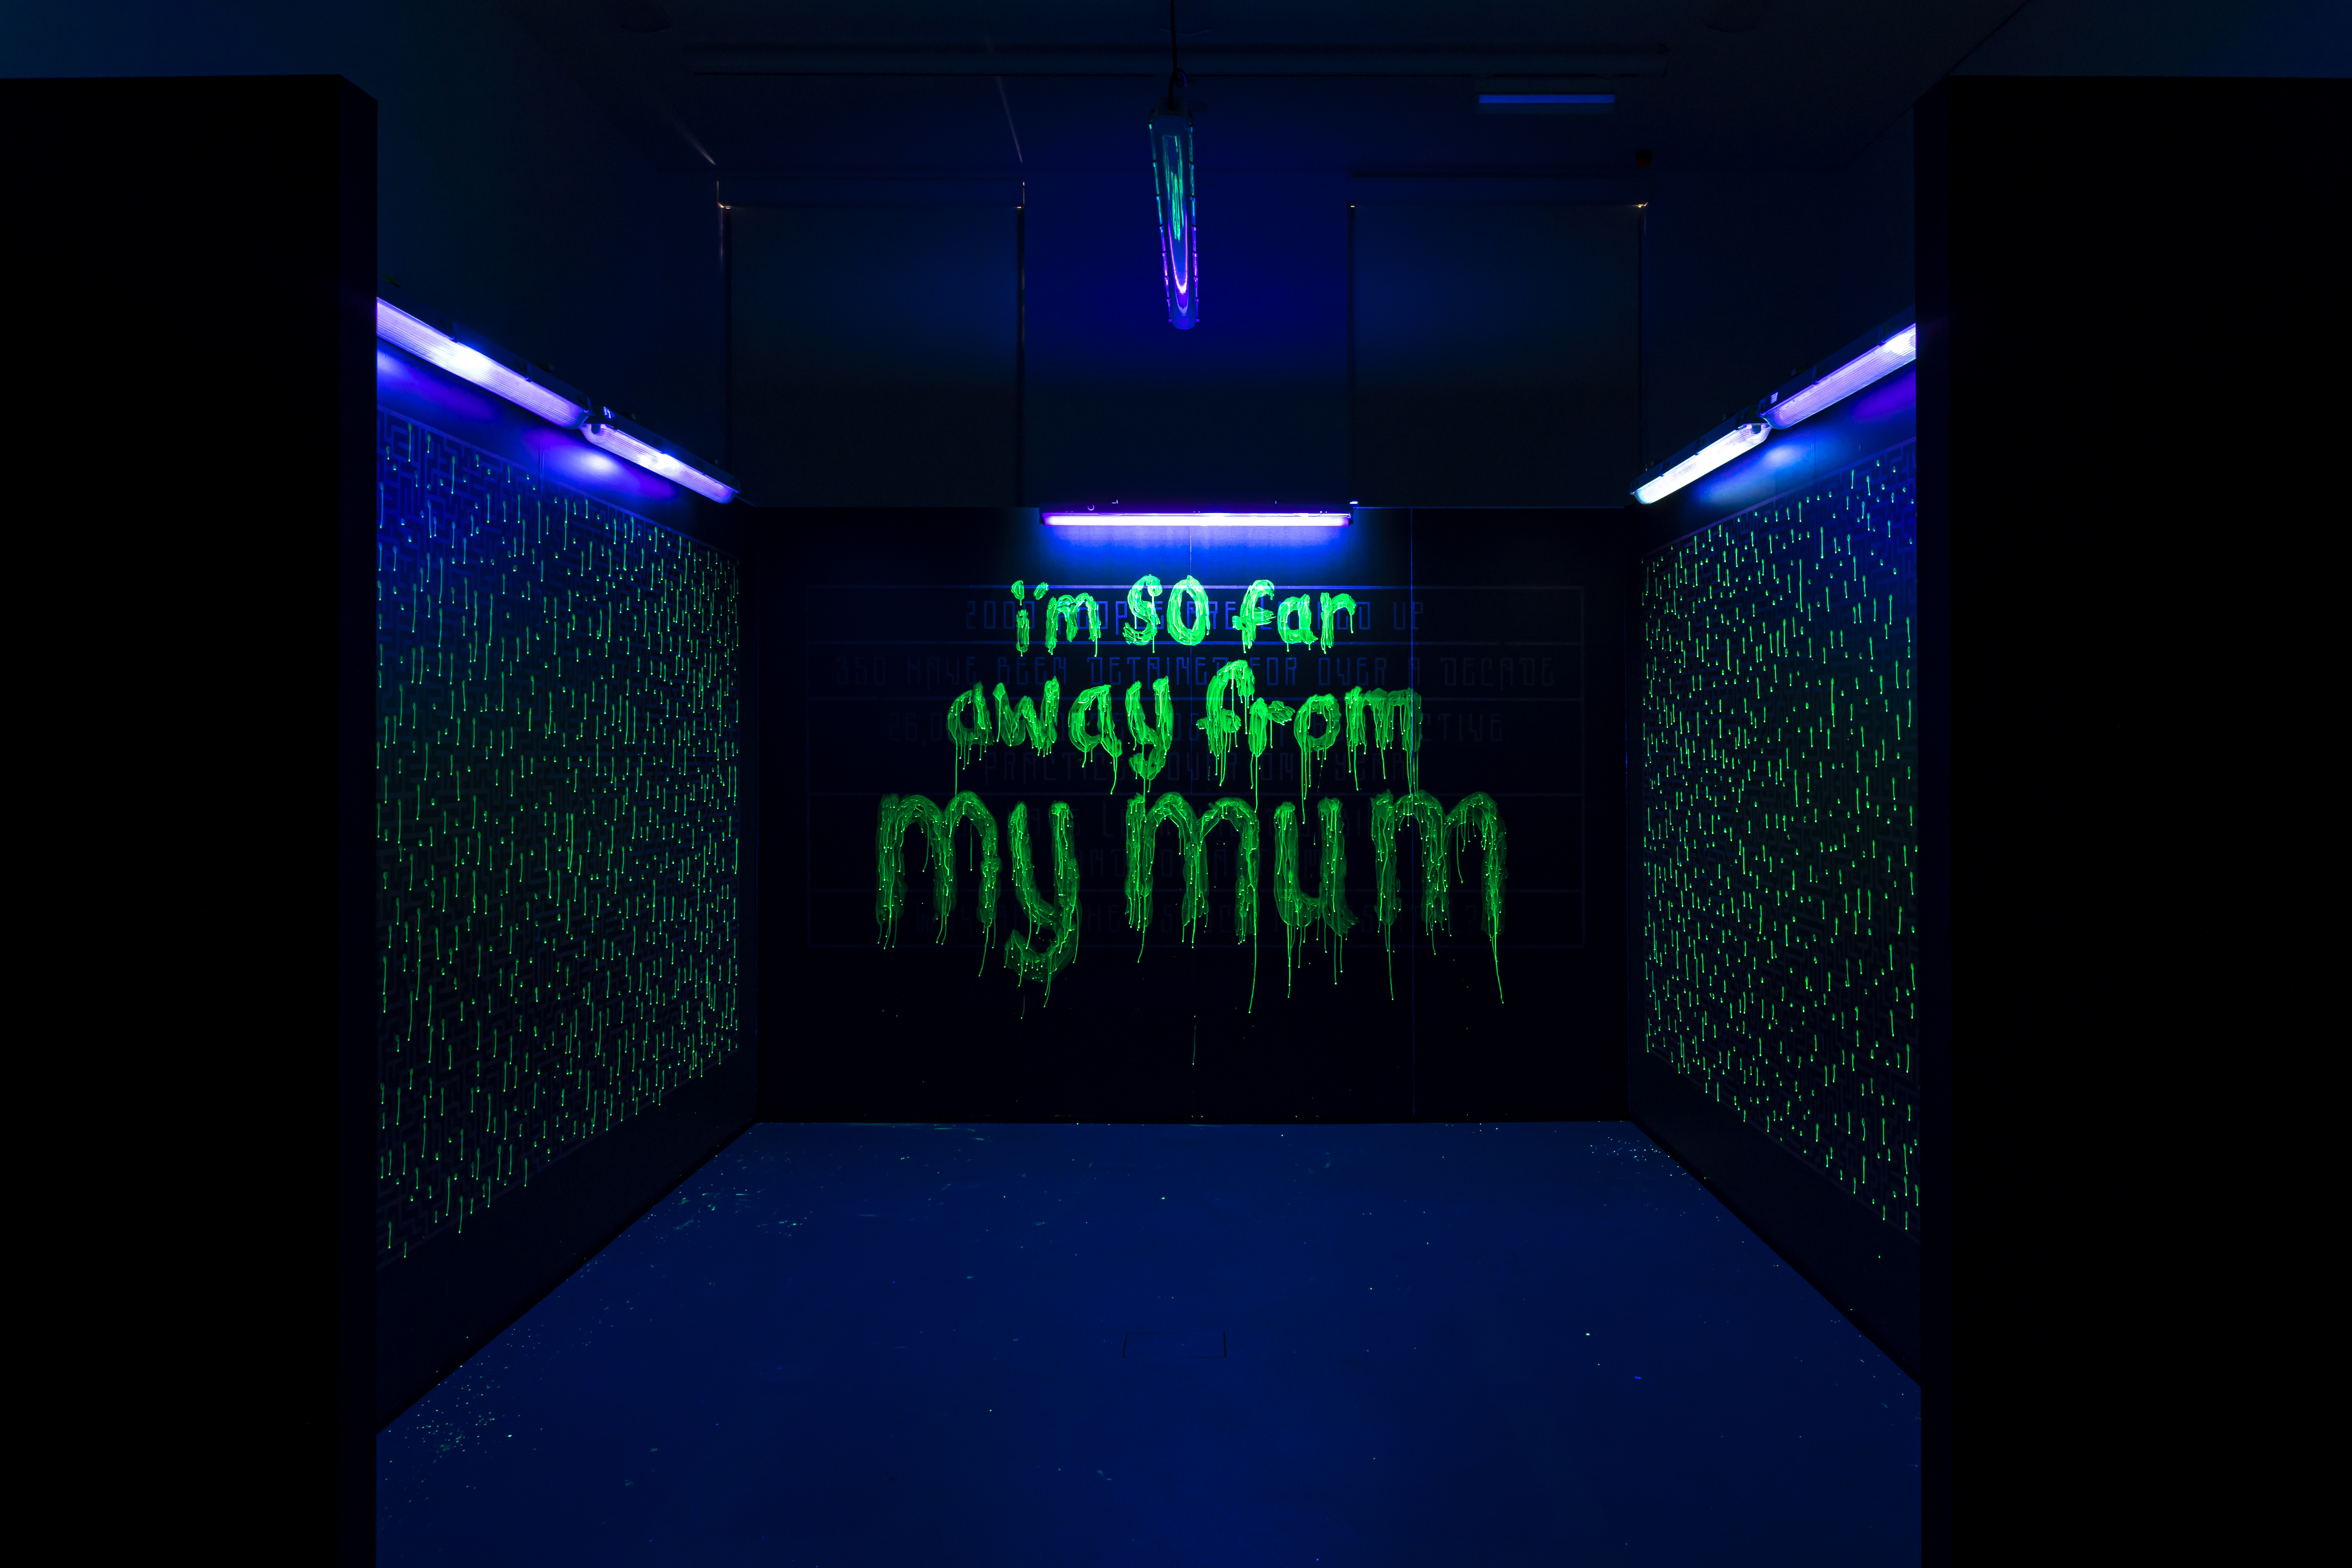 Why are we stuck in hospital? Art exhibition image by Foka Wolf. Writing on a wall says 'I'm so far away from my mum'